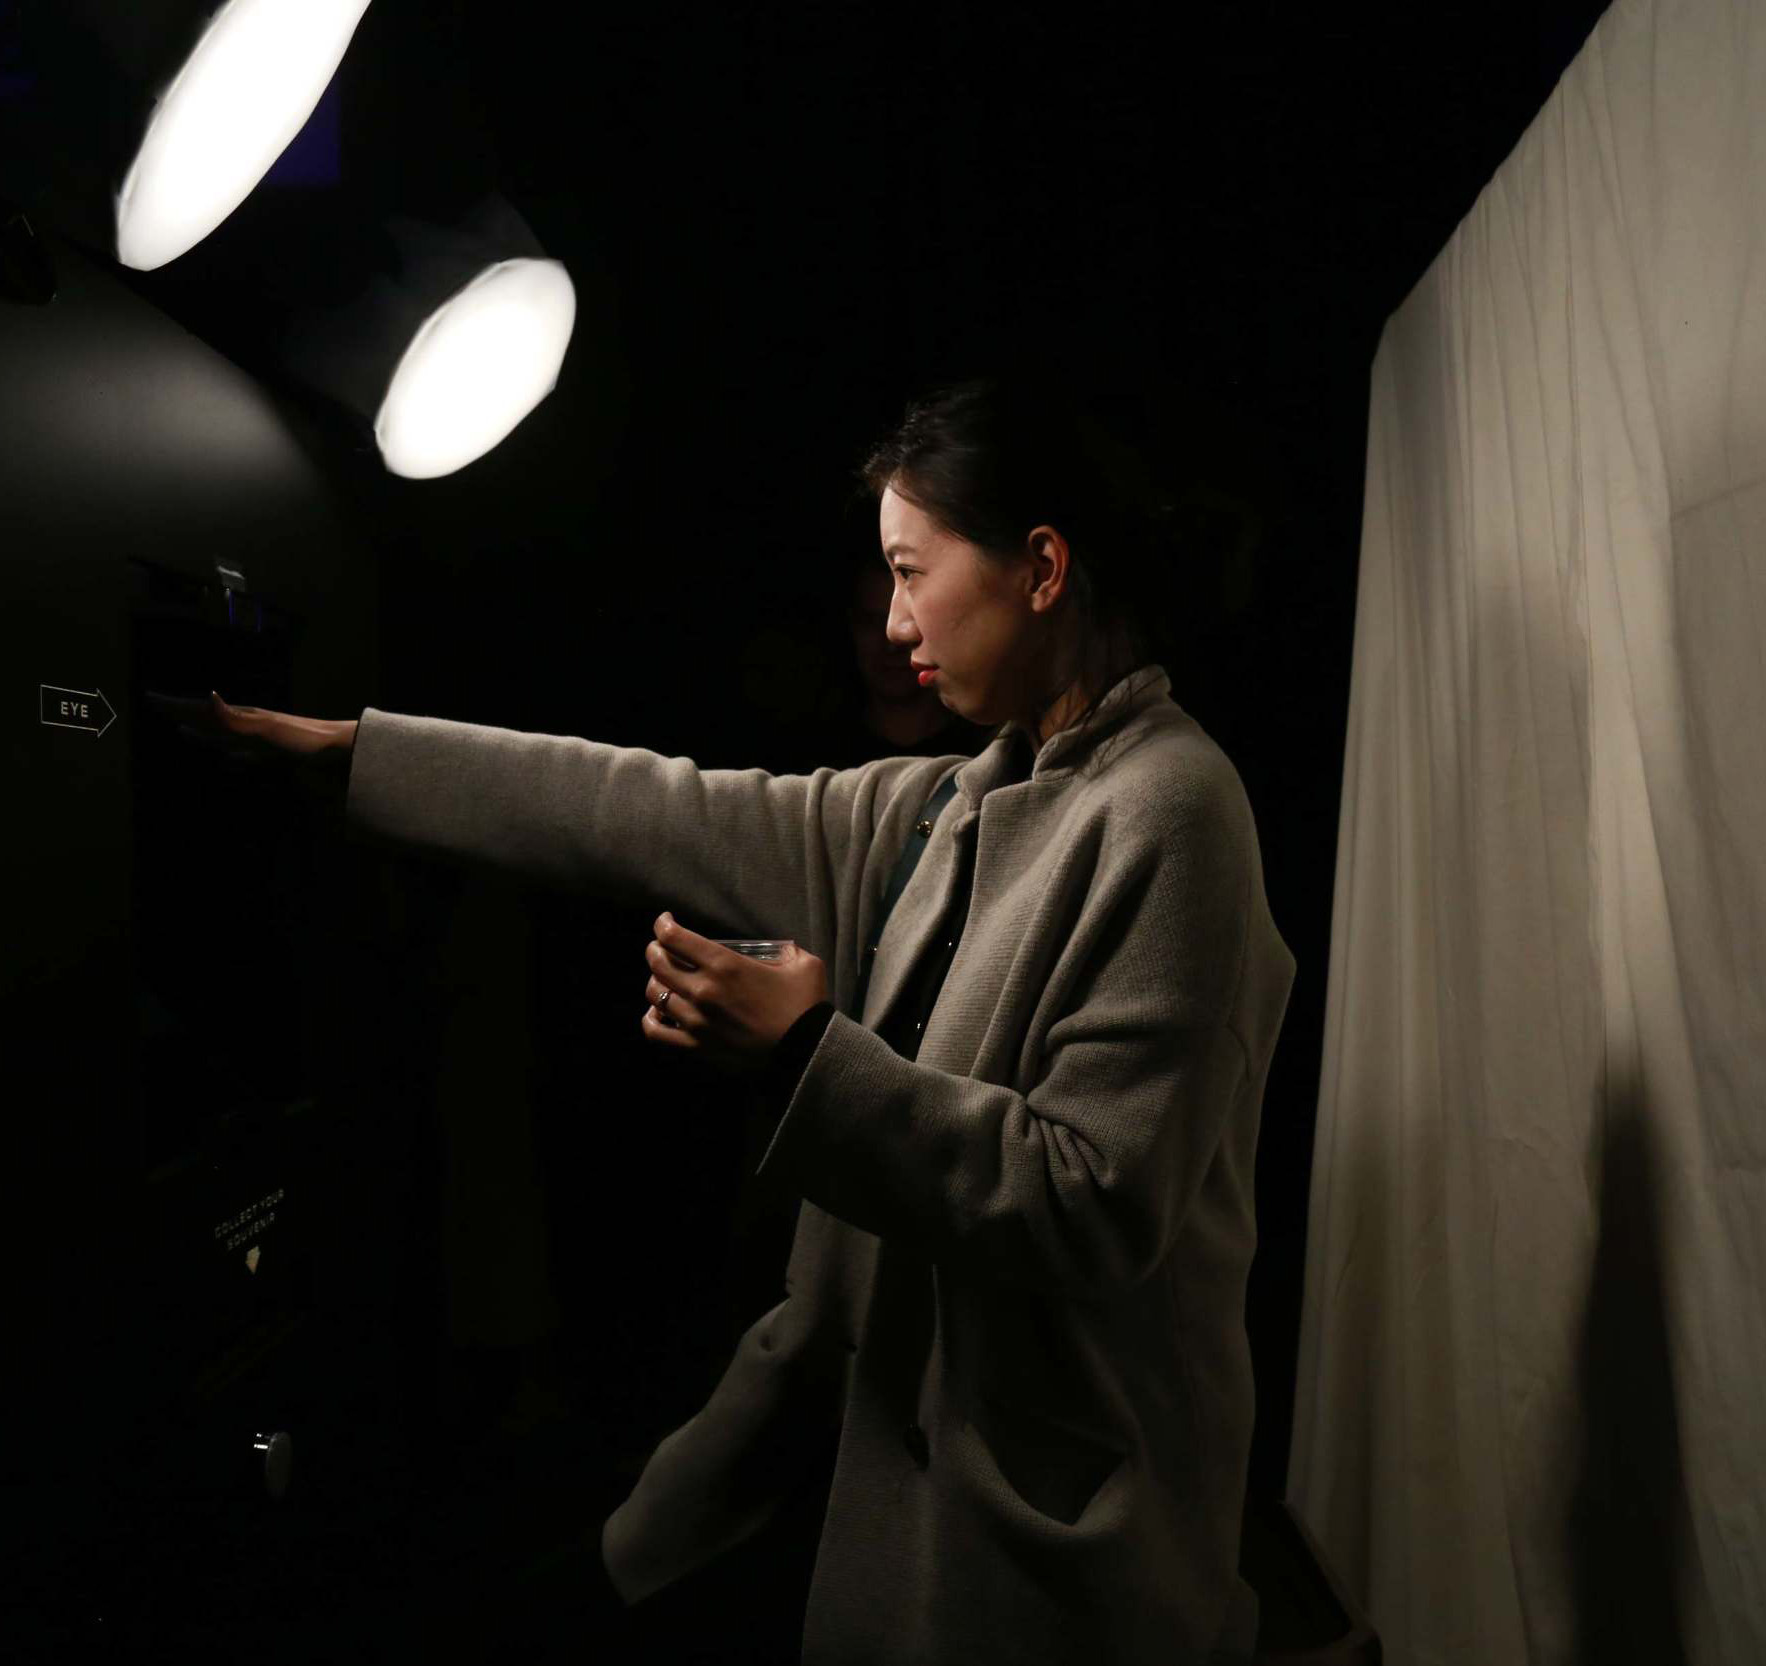 A woman, dramatically lit by spotlights, interacts with the photo booth installation with an outstretched arm.